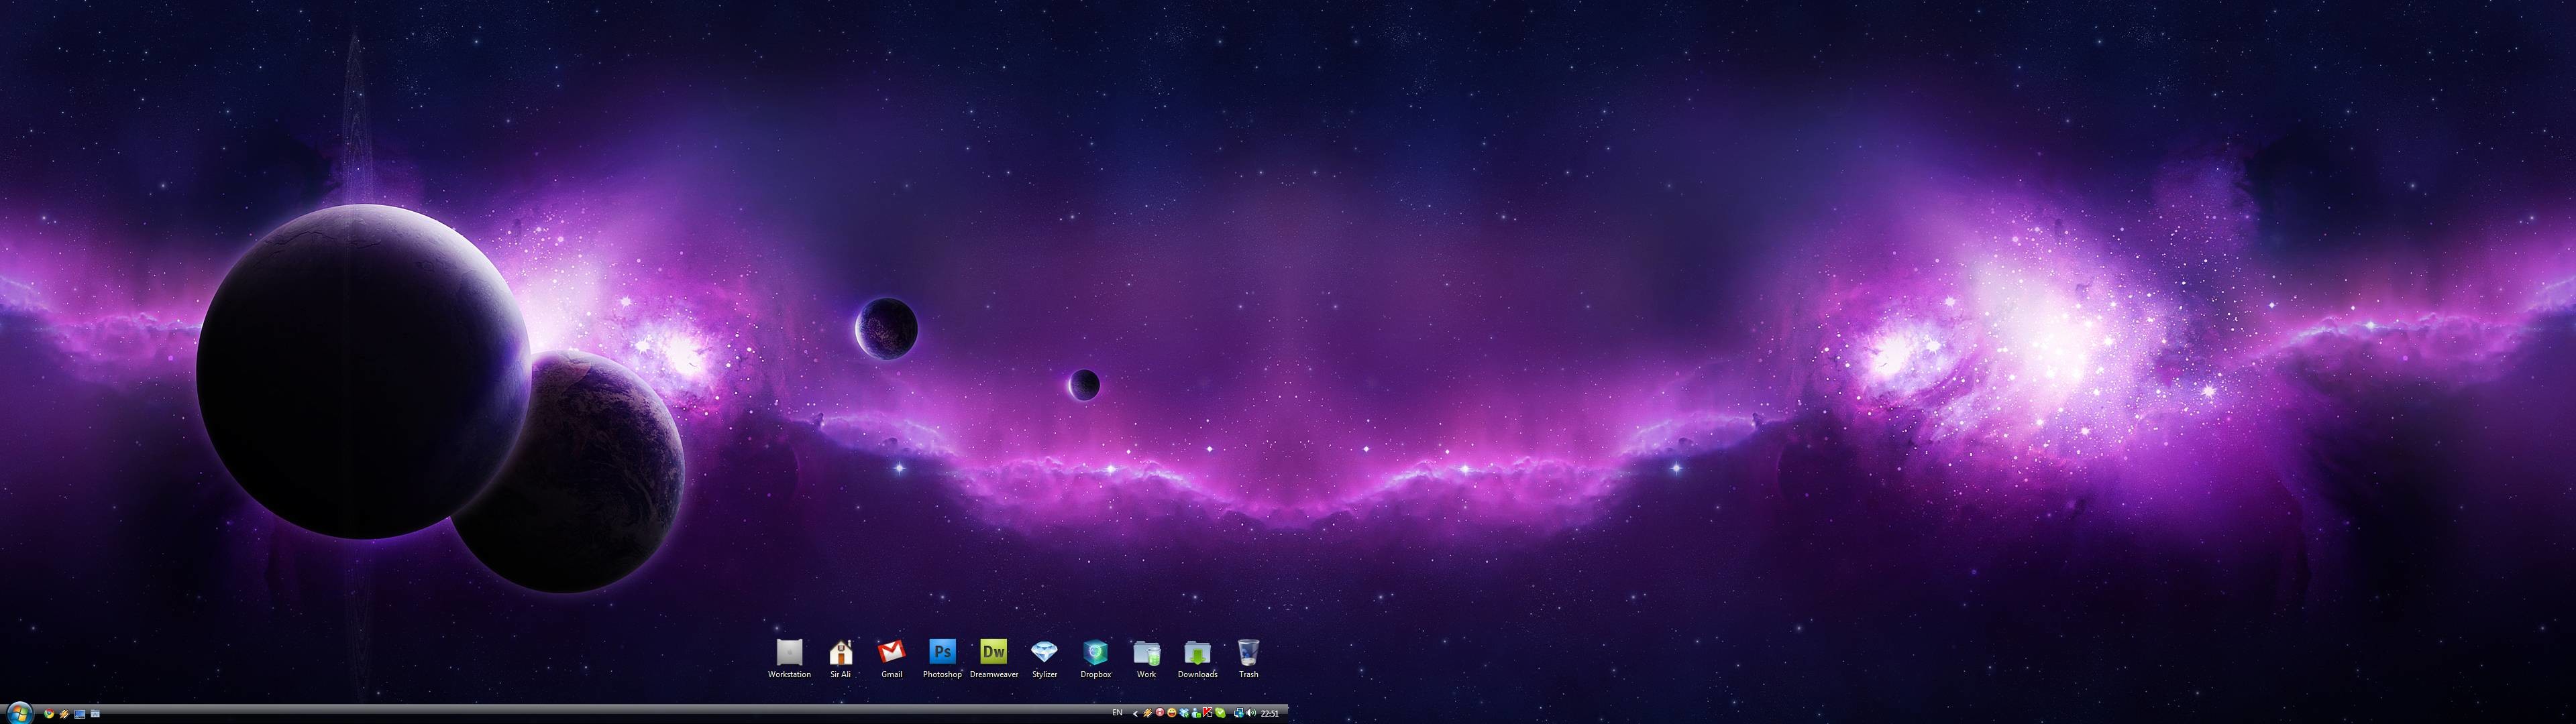 3840x1080 [][REQUEST] Can anyone find the source image or remove the taskbar  and icons?